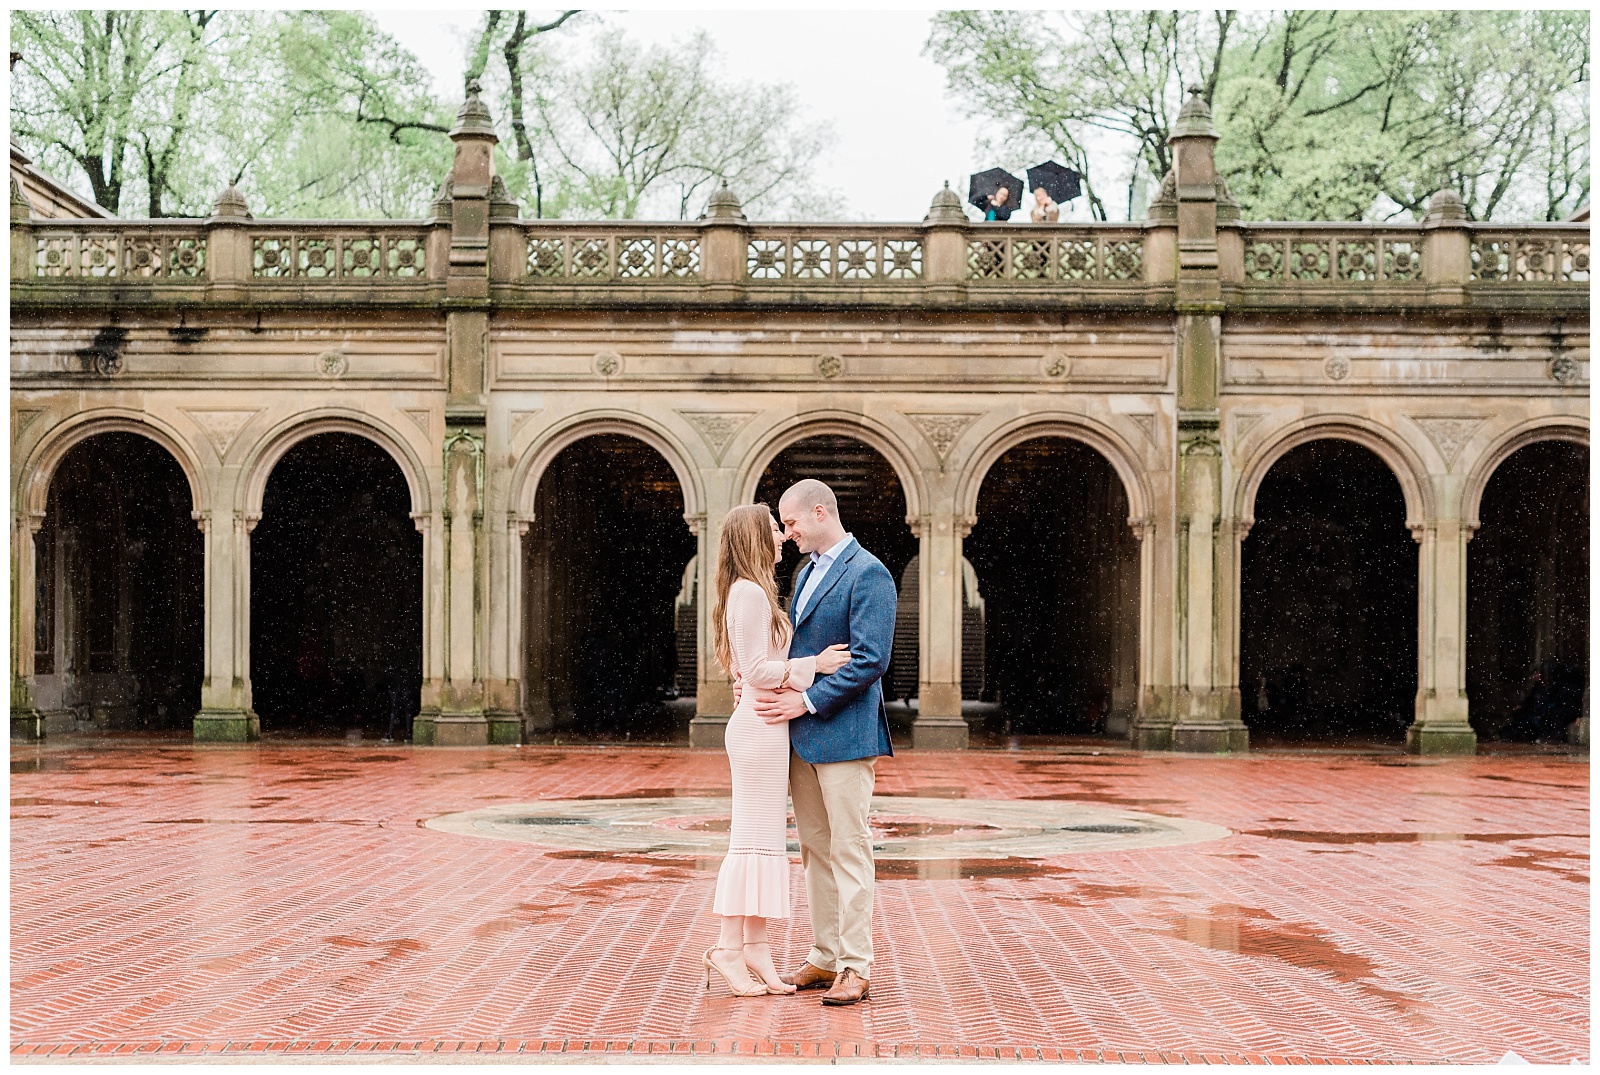 A couple holds each other in front of Bethesda Terrace arch ways in Central Park.